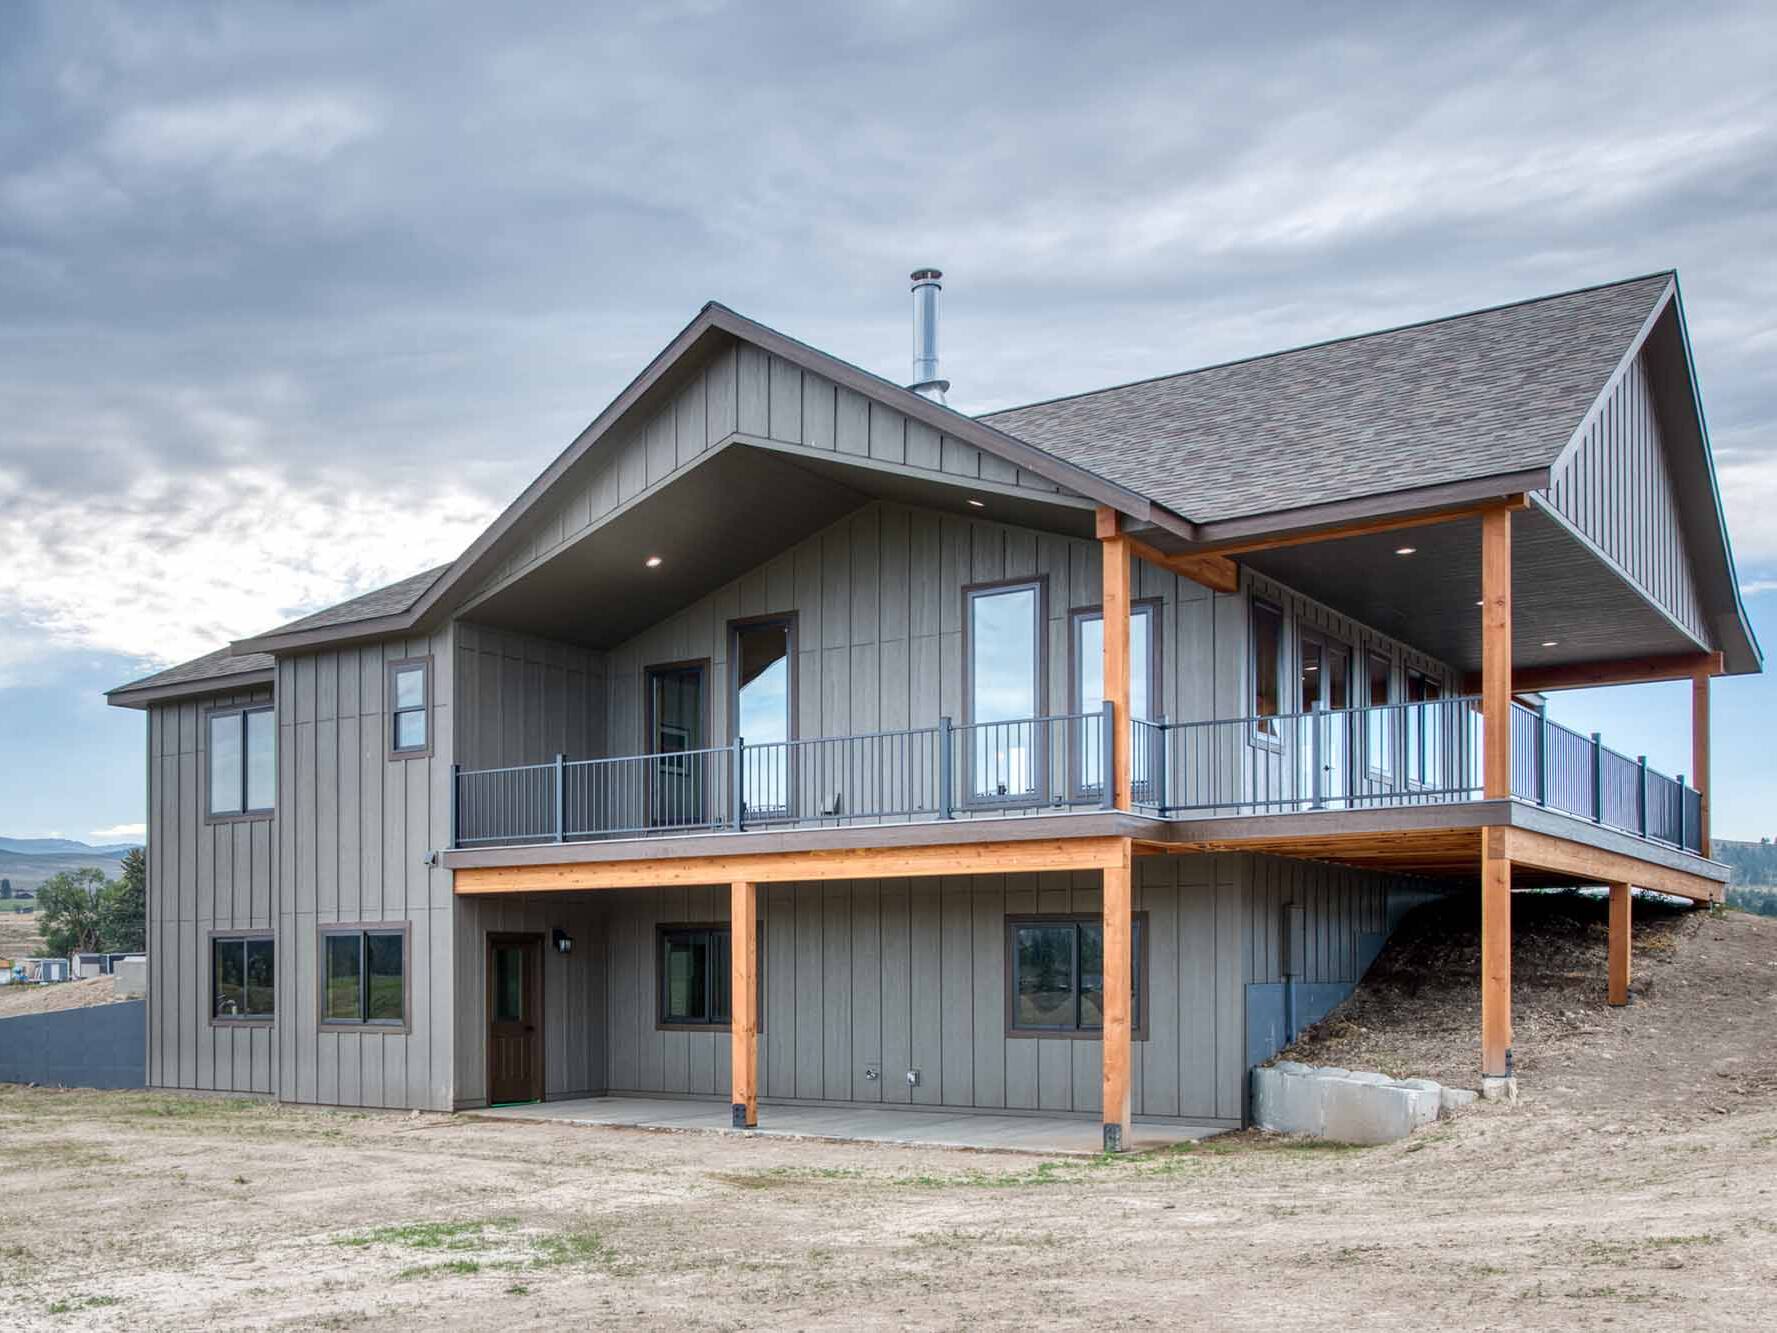 Exterior of a custom home with a covered wrap around porch and timber framing built by Big Sky Builders in Stevensville, MT